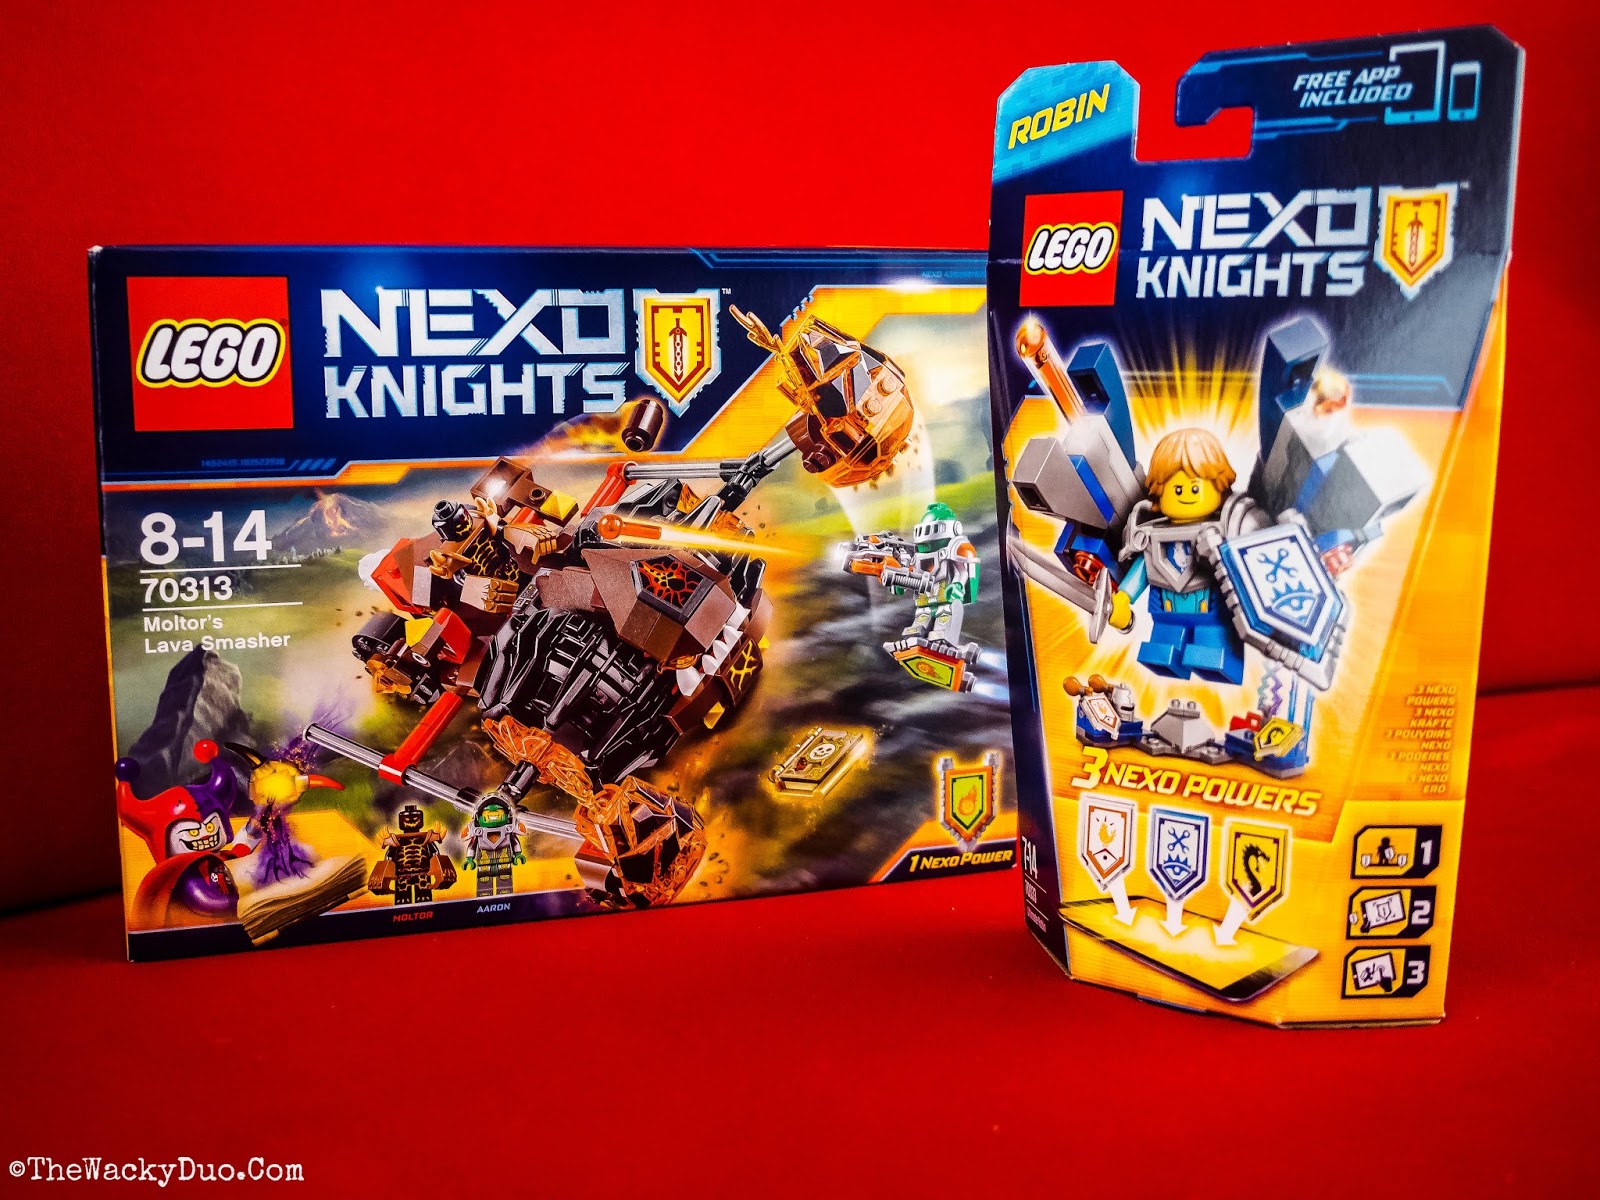 LEGO NEXO KNIGHTS Lands in Singapore!